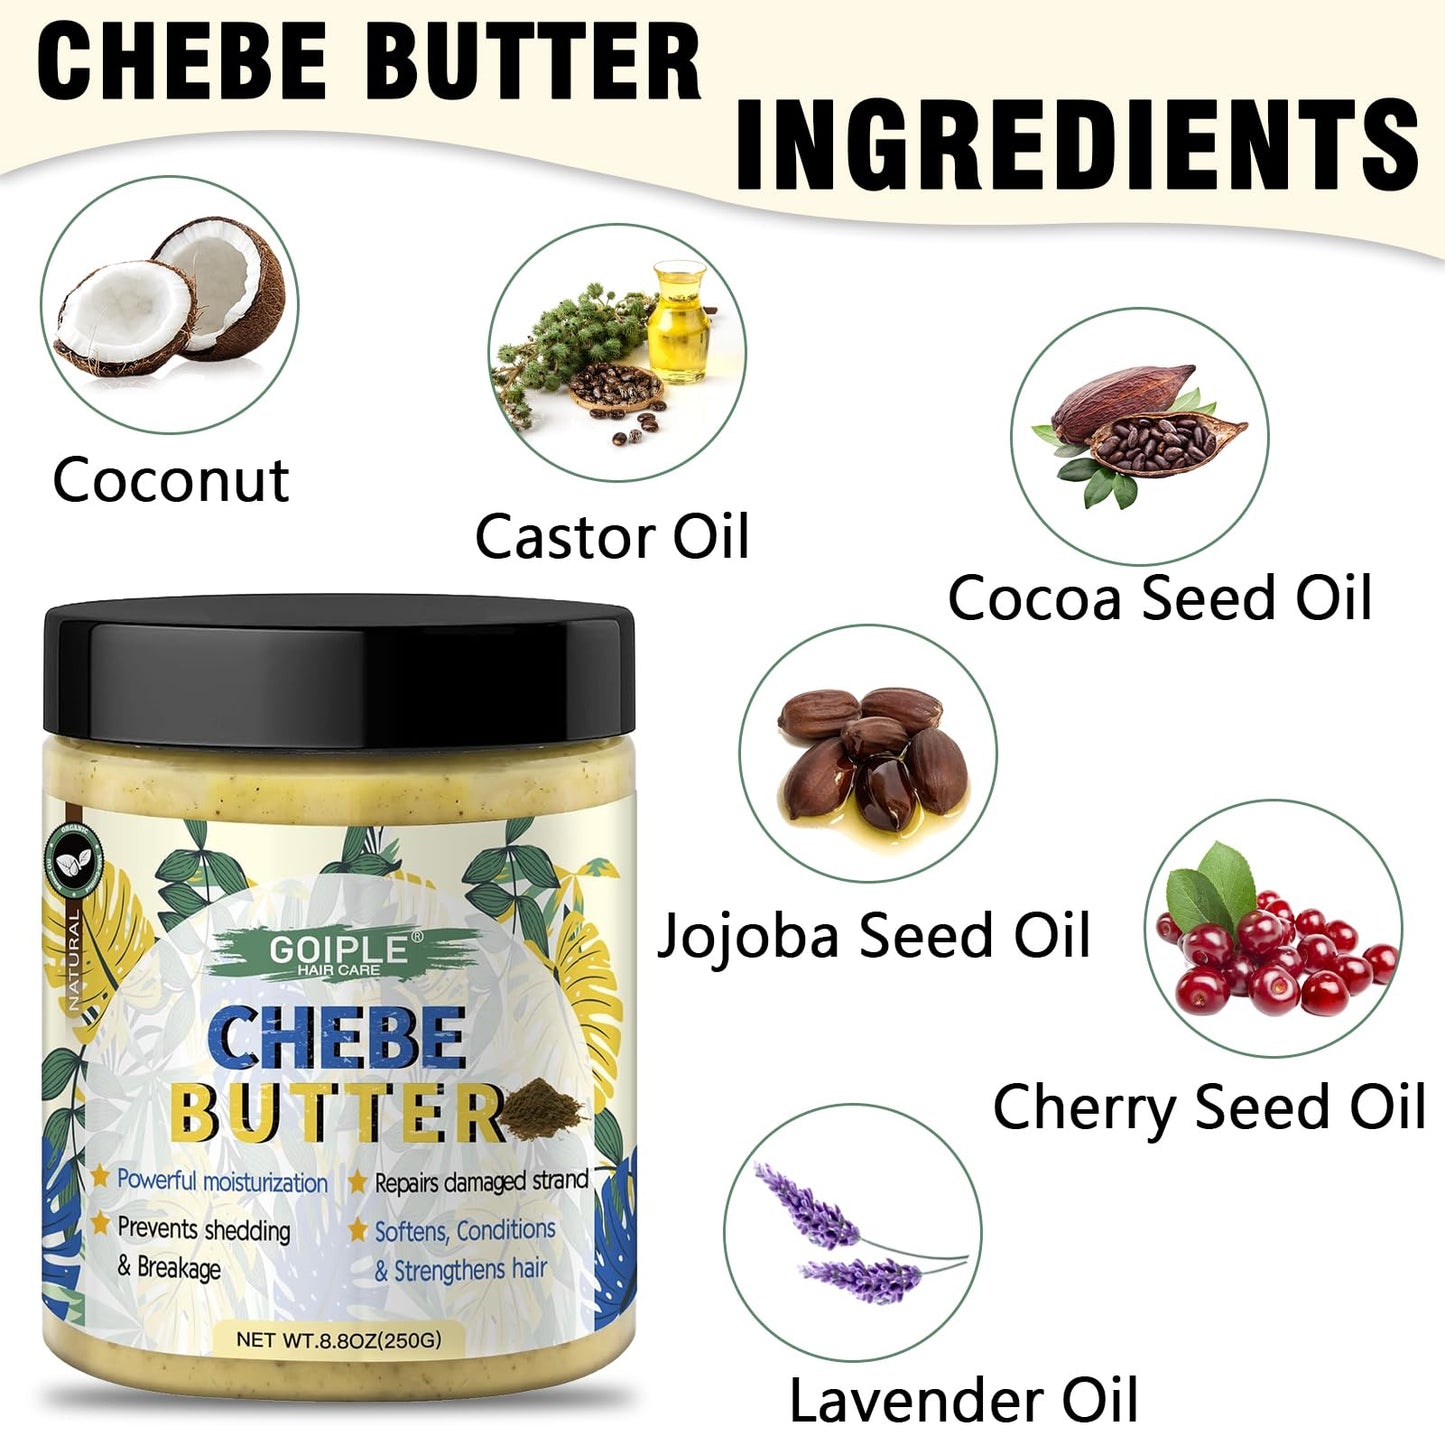 WOZUTUNT 8.8 oz Chebe Butter For Hair Growth Chebe Hair Butter Grease For Hair Men, Women, Chebe Butter for Hair Thickening, Chebe Hair Growth Butter Deep Moisturization For Healthy Hair Growth